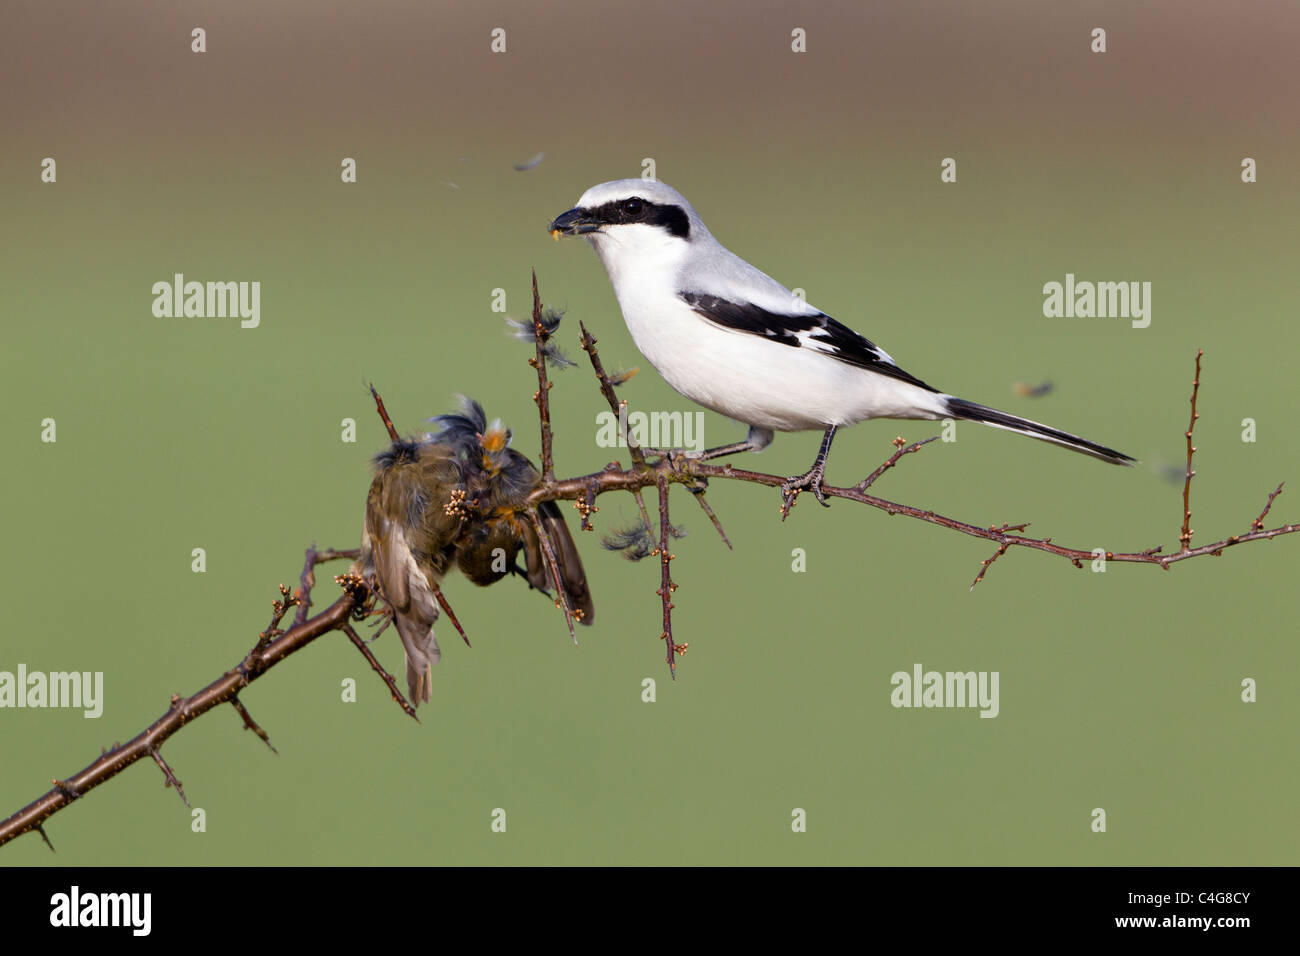 Great Greay Shrike (Lanius excubitor), perched on branch, whith impaled robin, Lower Saxony, Germany Stock Photo